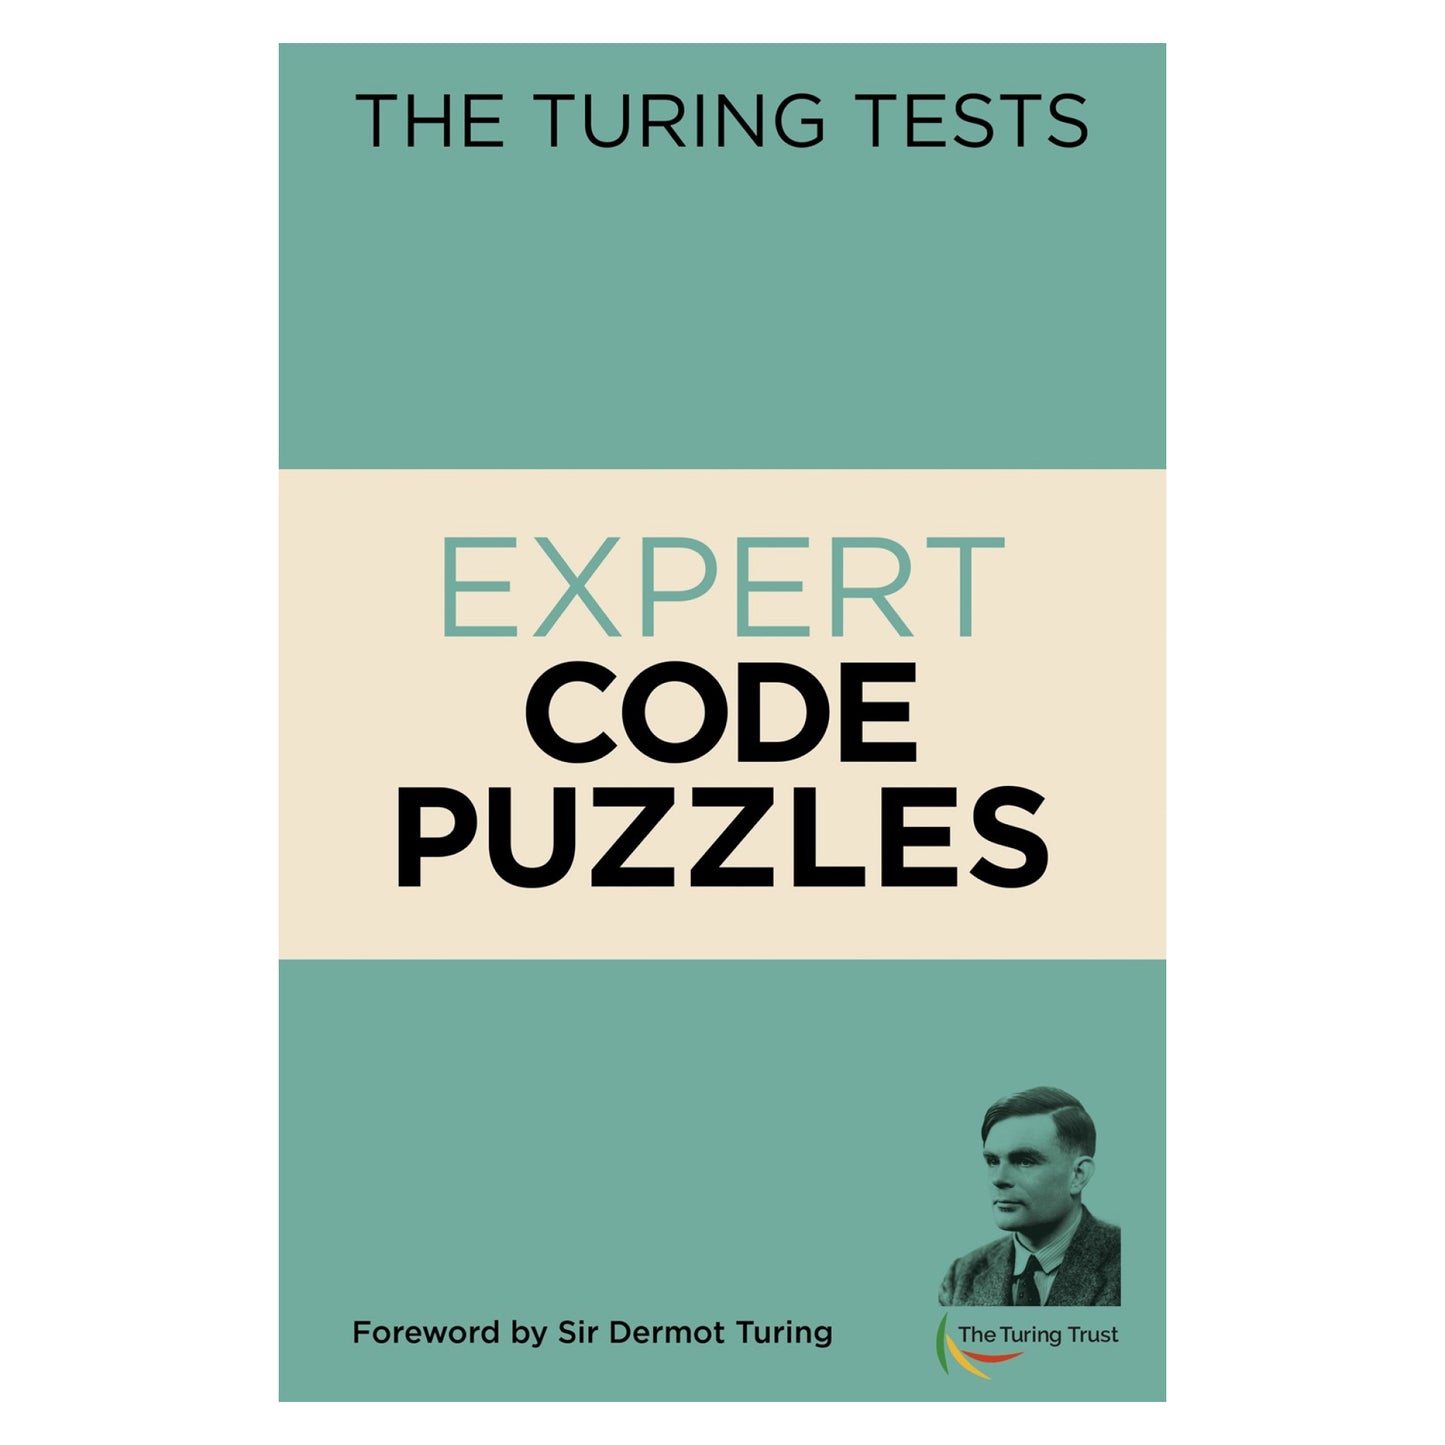 The Turing Tests: Expert Code Puzzles